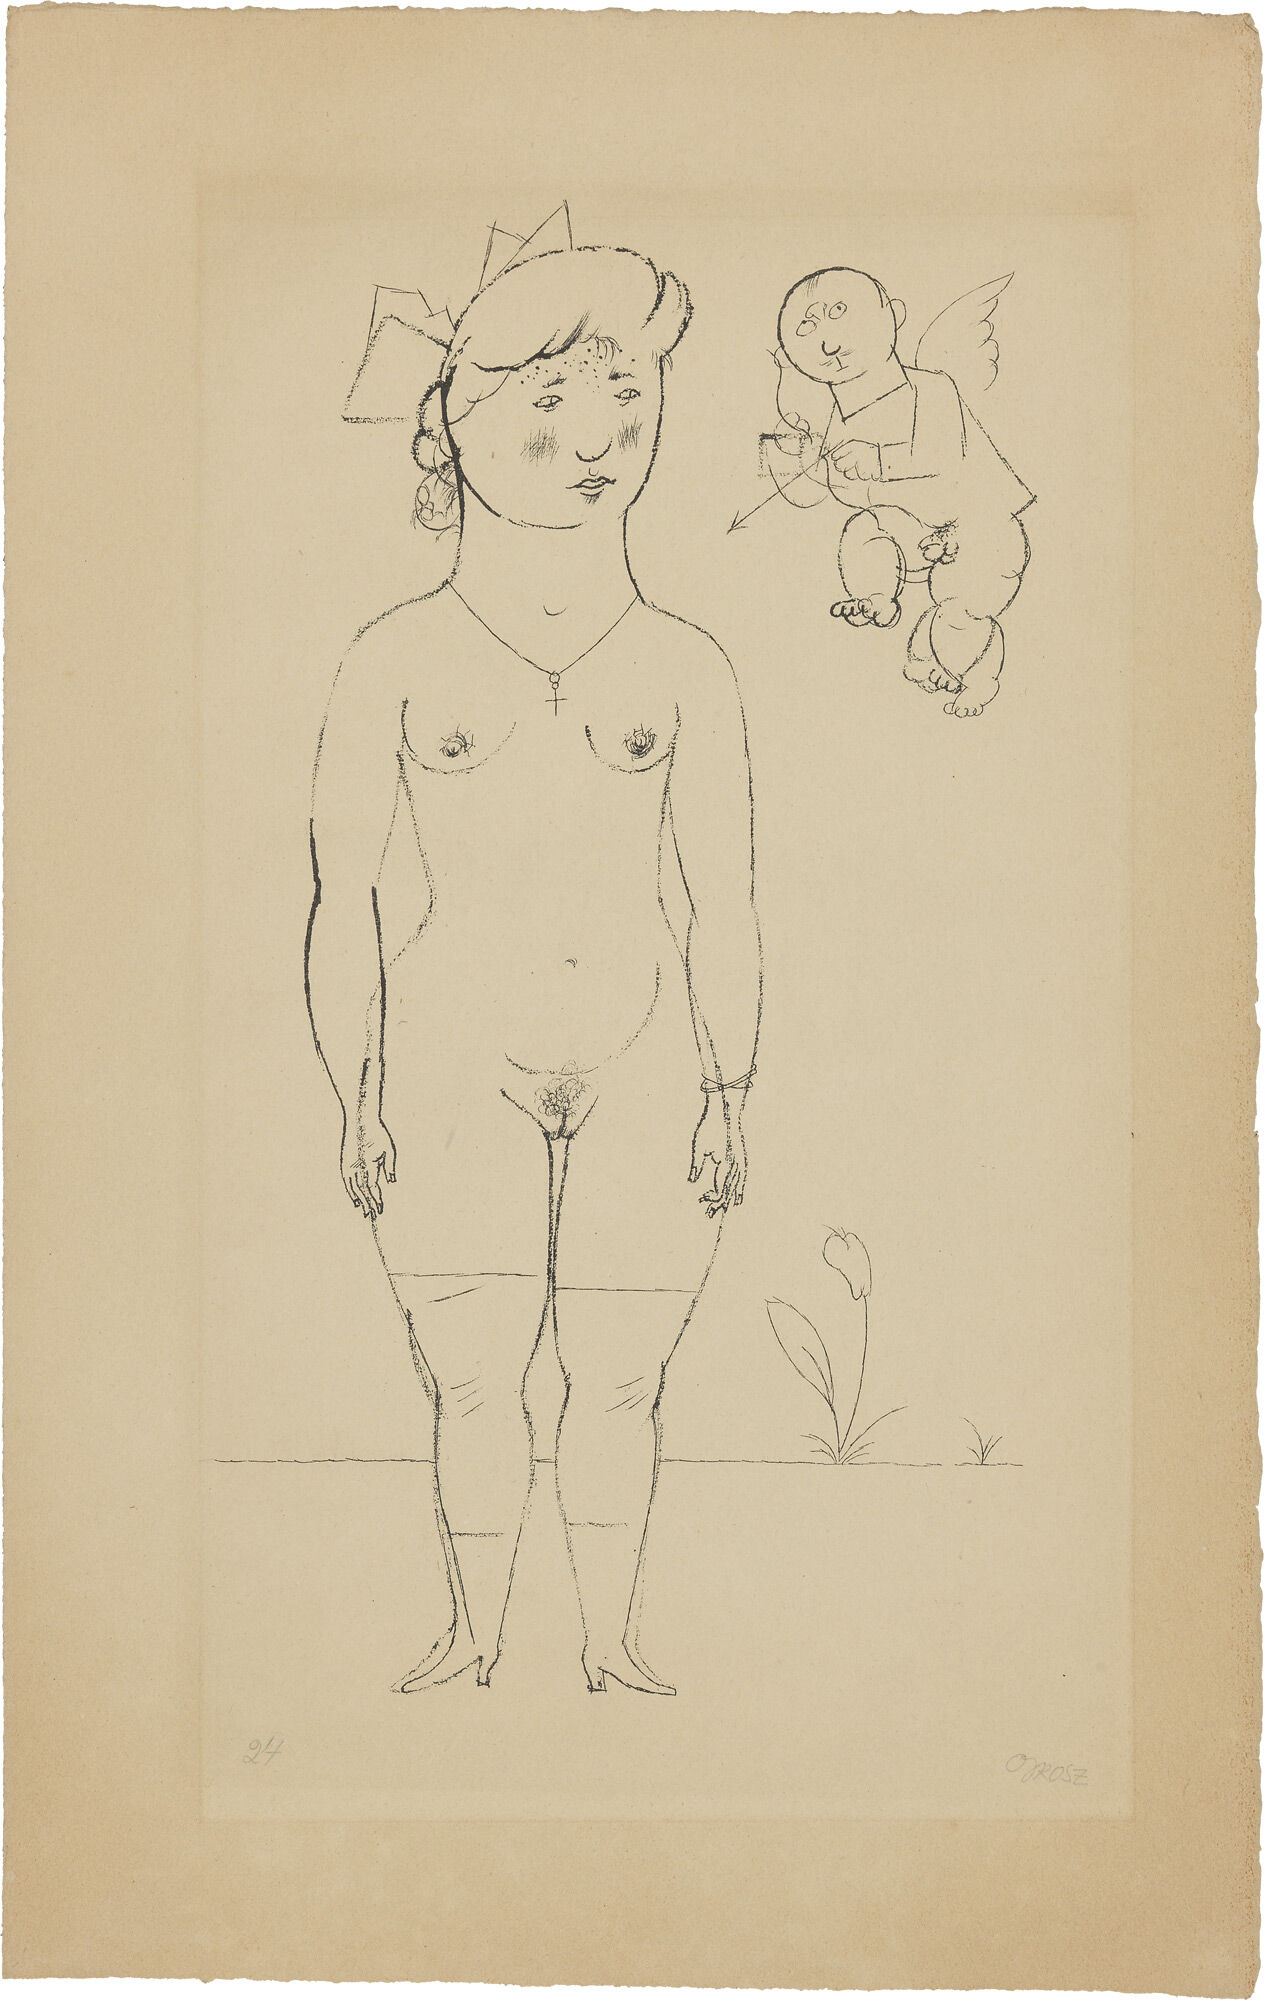 Picture "The Neighbor's Daughter or Spring Fever" (1919/1921) by George Grosz